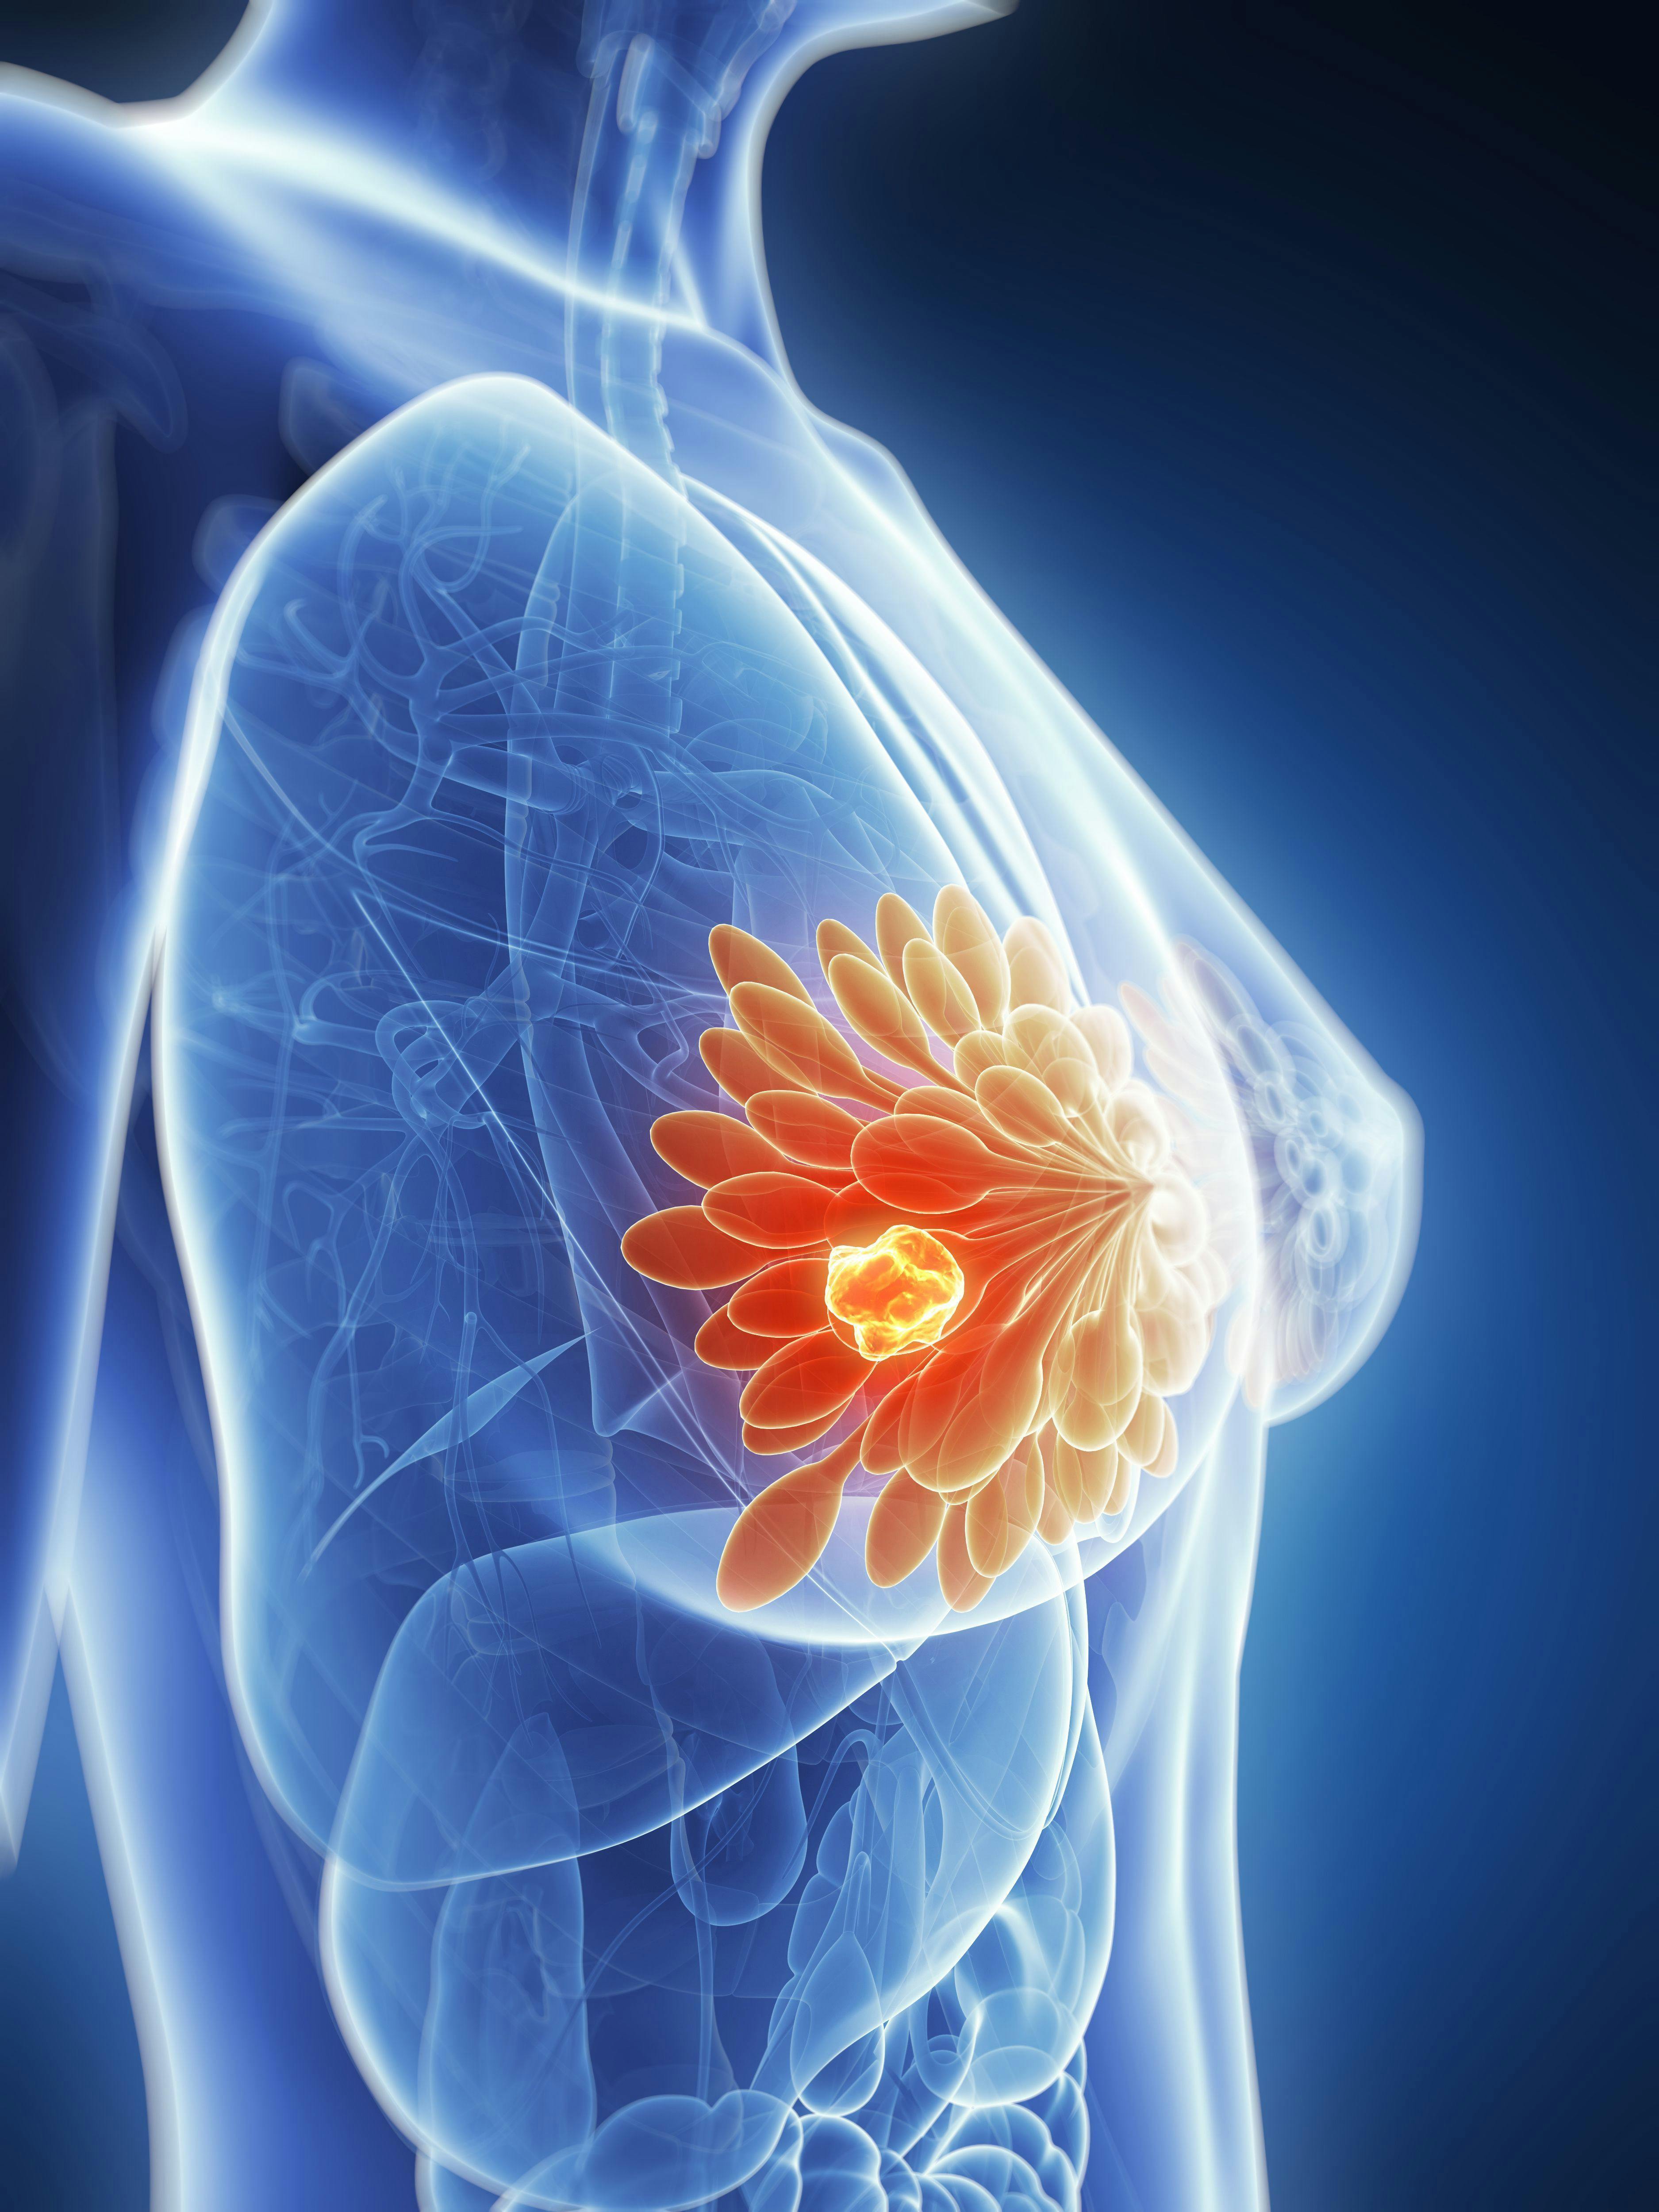 The fast track designation for CFI-402257 in an advanced breast cancer subtype was supported by data from a phase 1 trial read out at the 2022 San Antonio Breast Cancer Symposium.